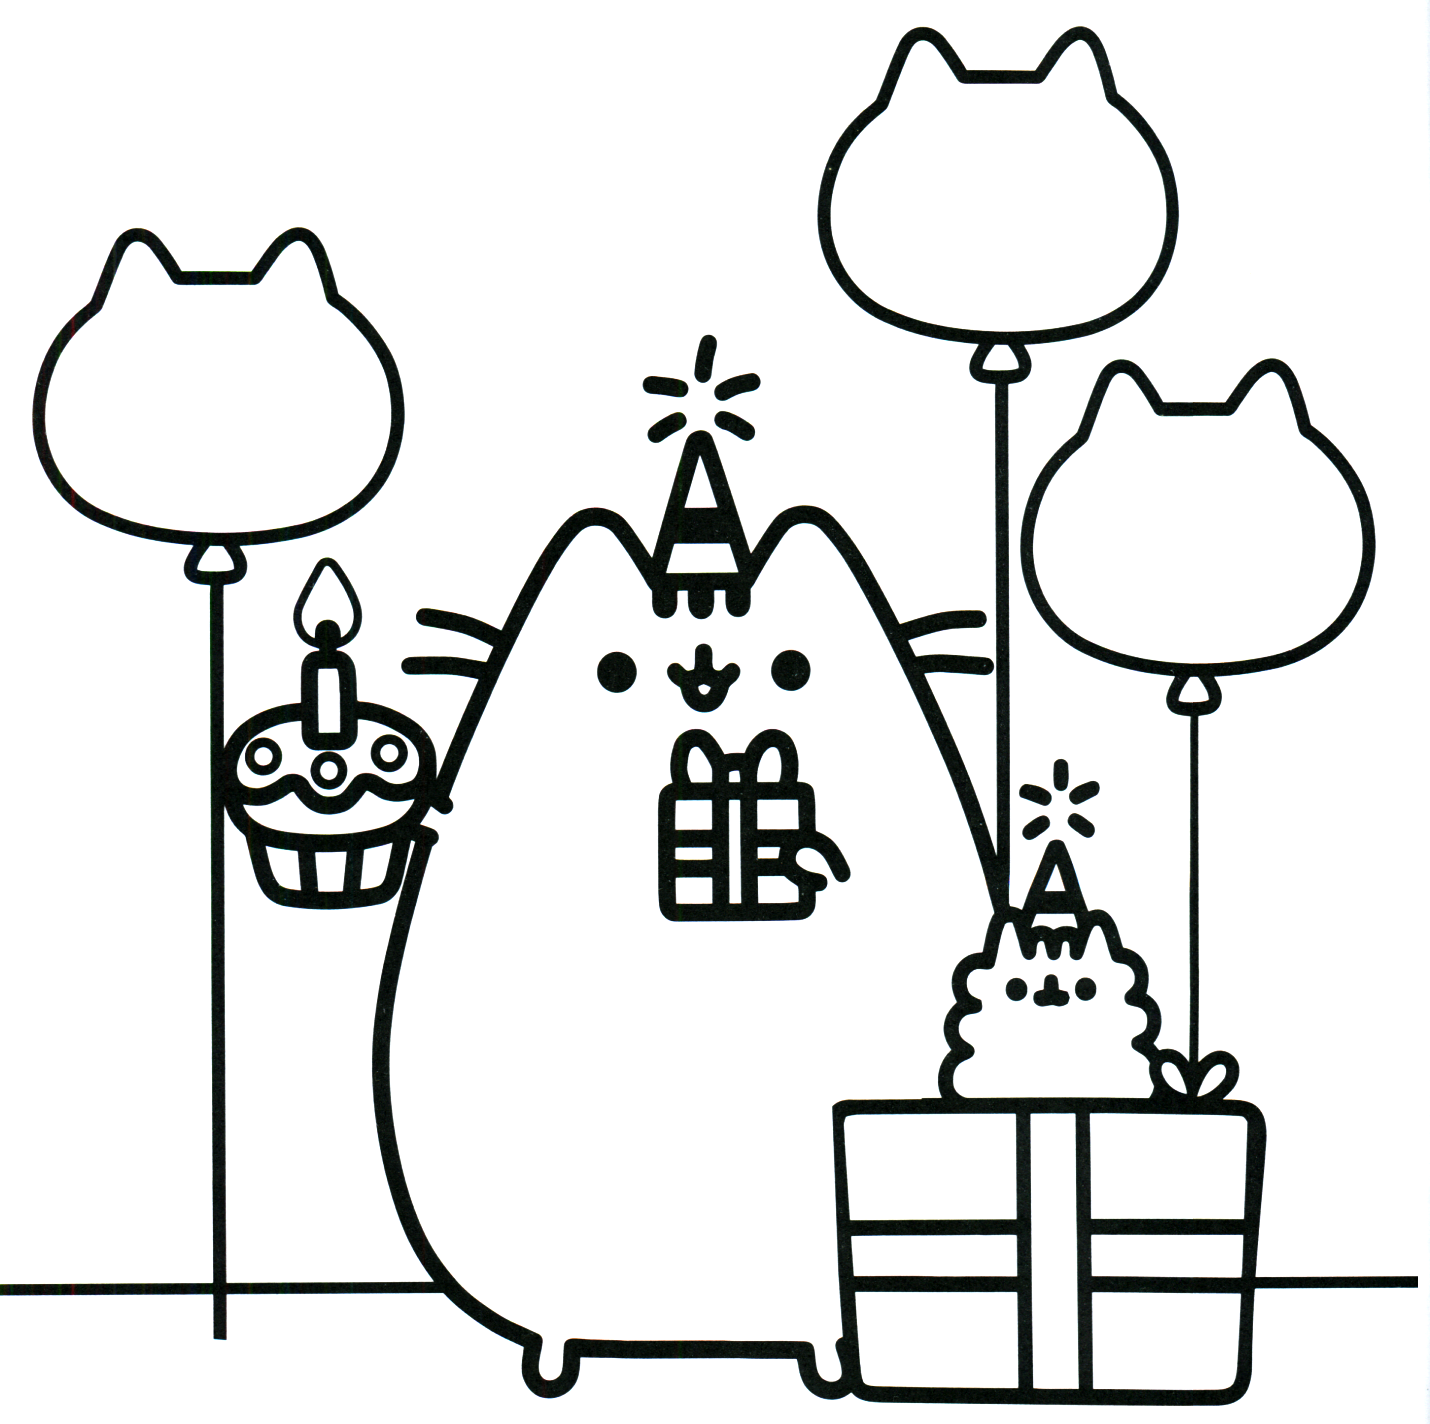 Download Pusheen Coloring Pages - Best Coloring Pages For Kids